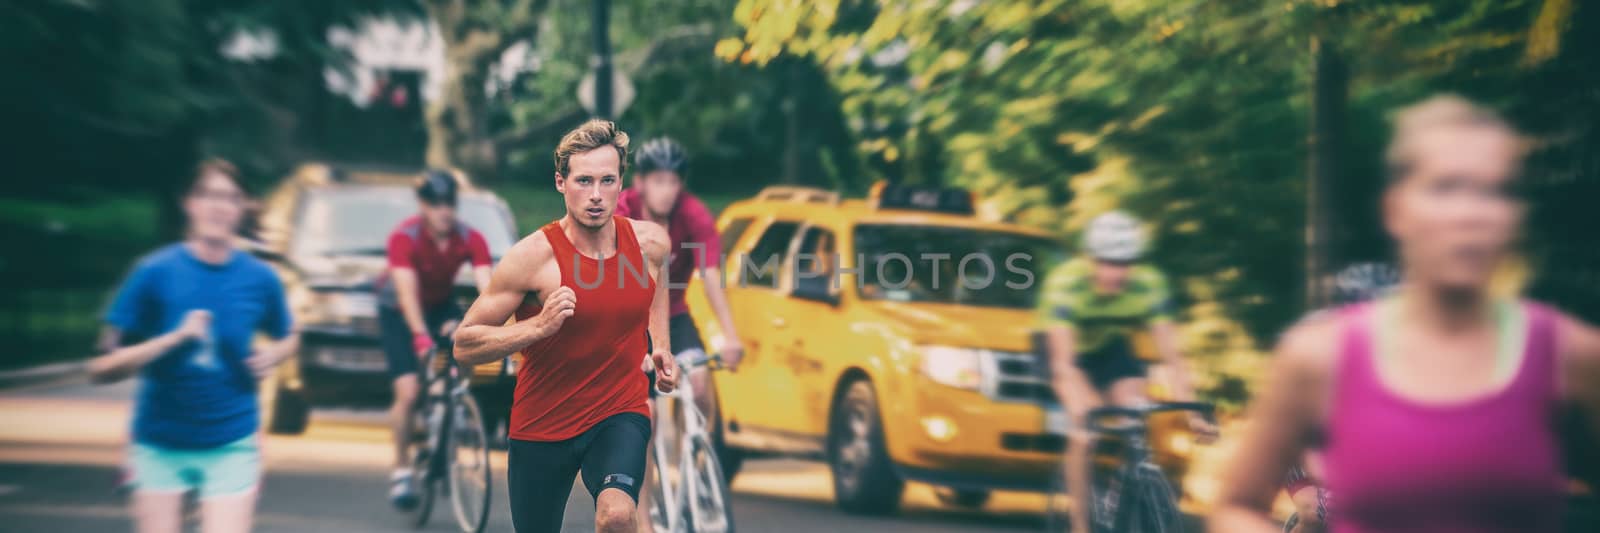 Fit runners motion blur people crowd training in city panorama banner - Athletes jogging, biking in New York city with yellow cabs cars background. Man running fast in blurred motion.